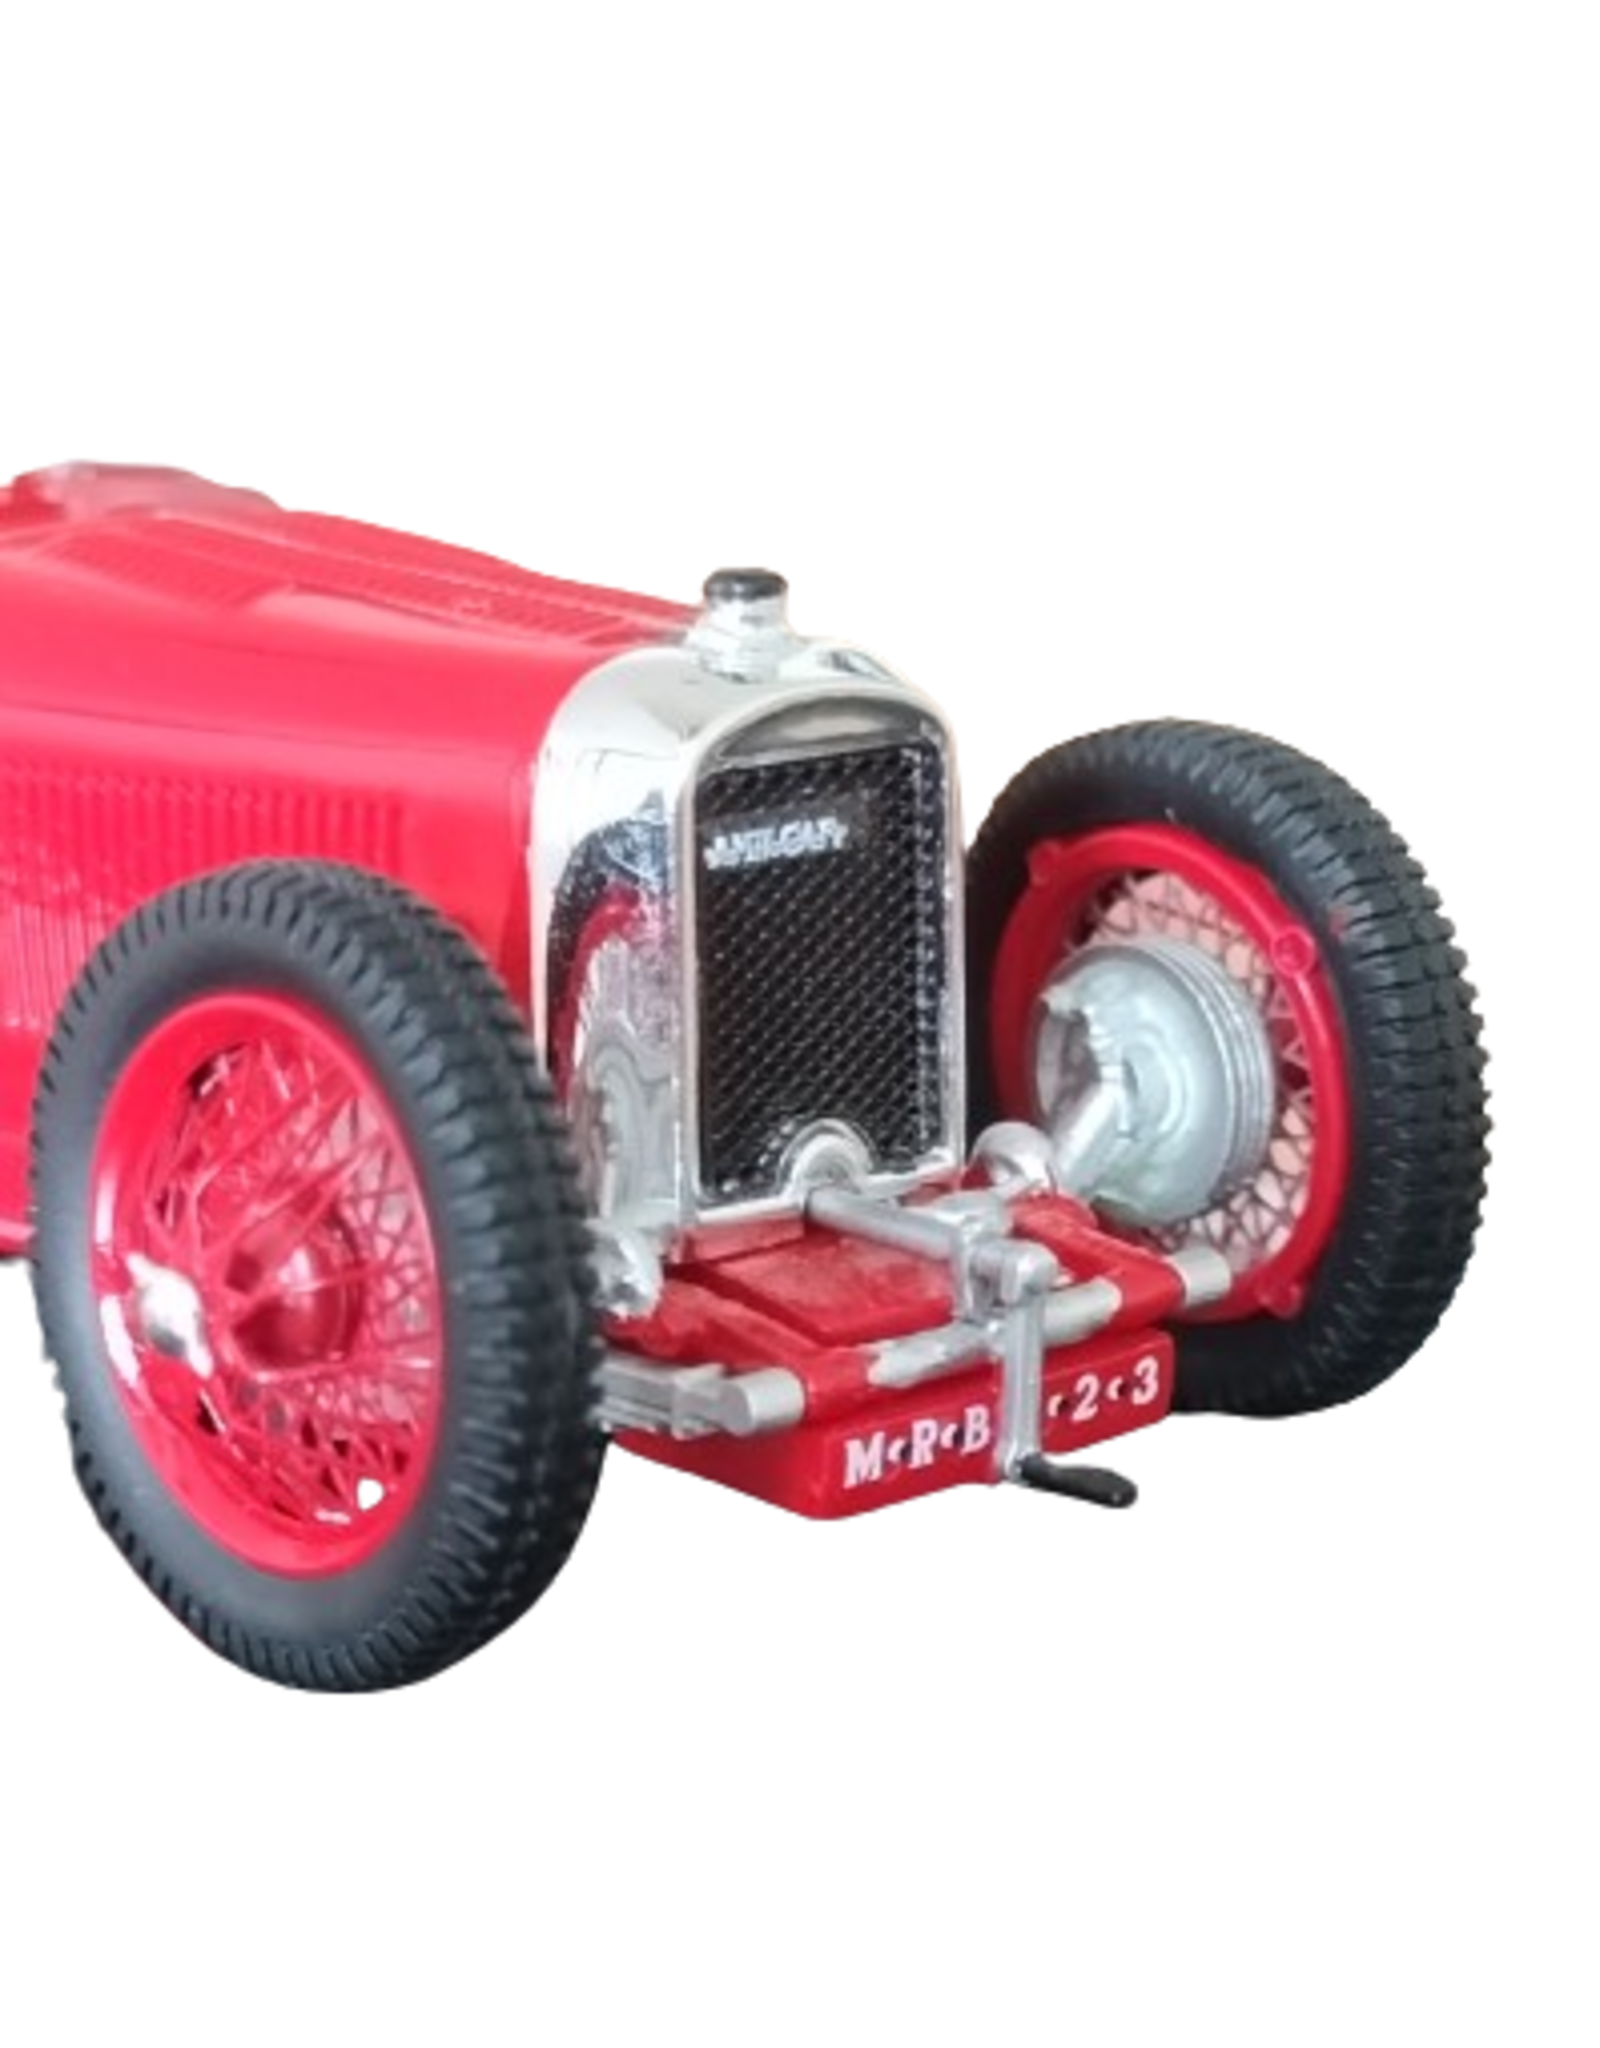 Amilcar Amilcar C6 Racer (1928)red